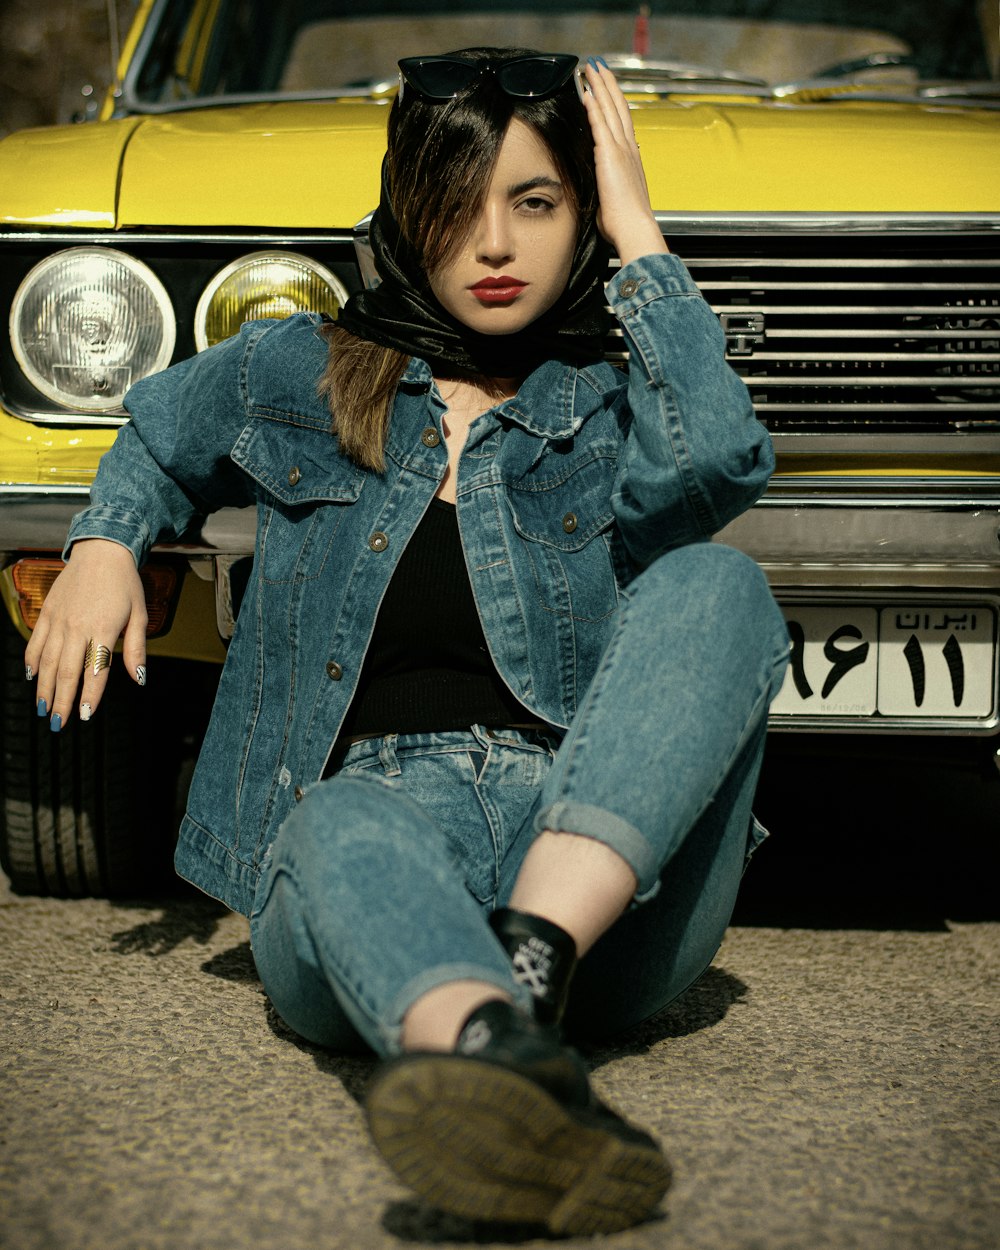 a woman sitting on the ground next to a yellow car